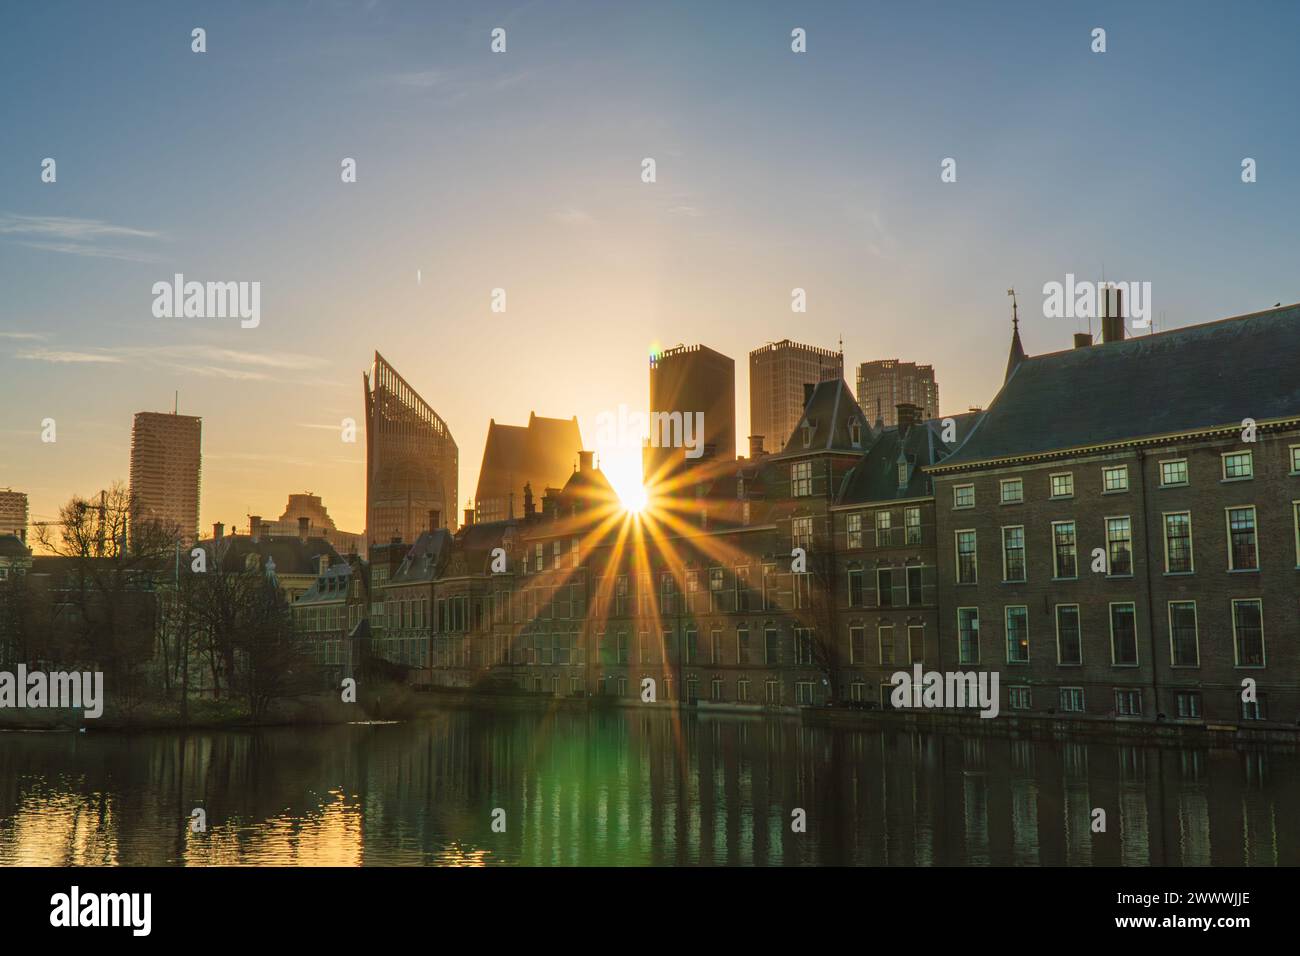 Sun rays piercing through the Binnenhof Castle, Mauritshuis museum and the modern skyline of The Hague, the Netherland. Clear sky, spring. Stock Photo